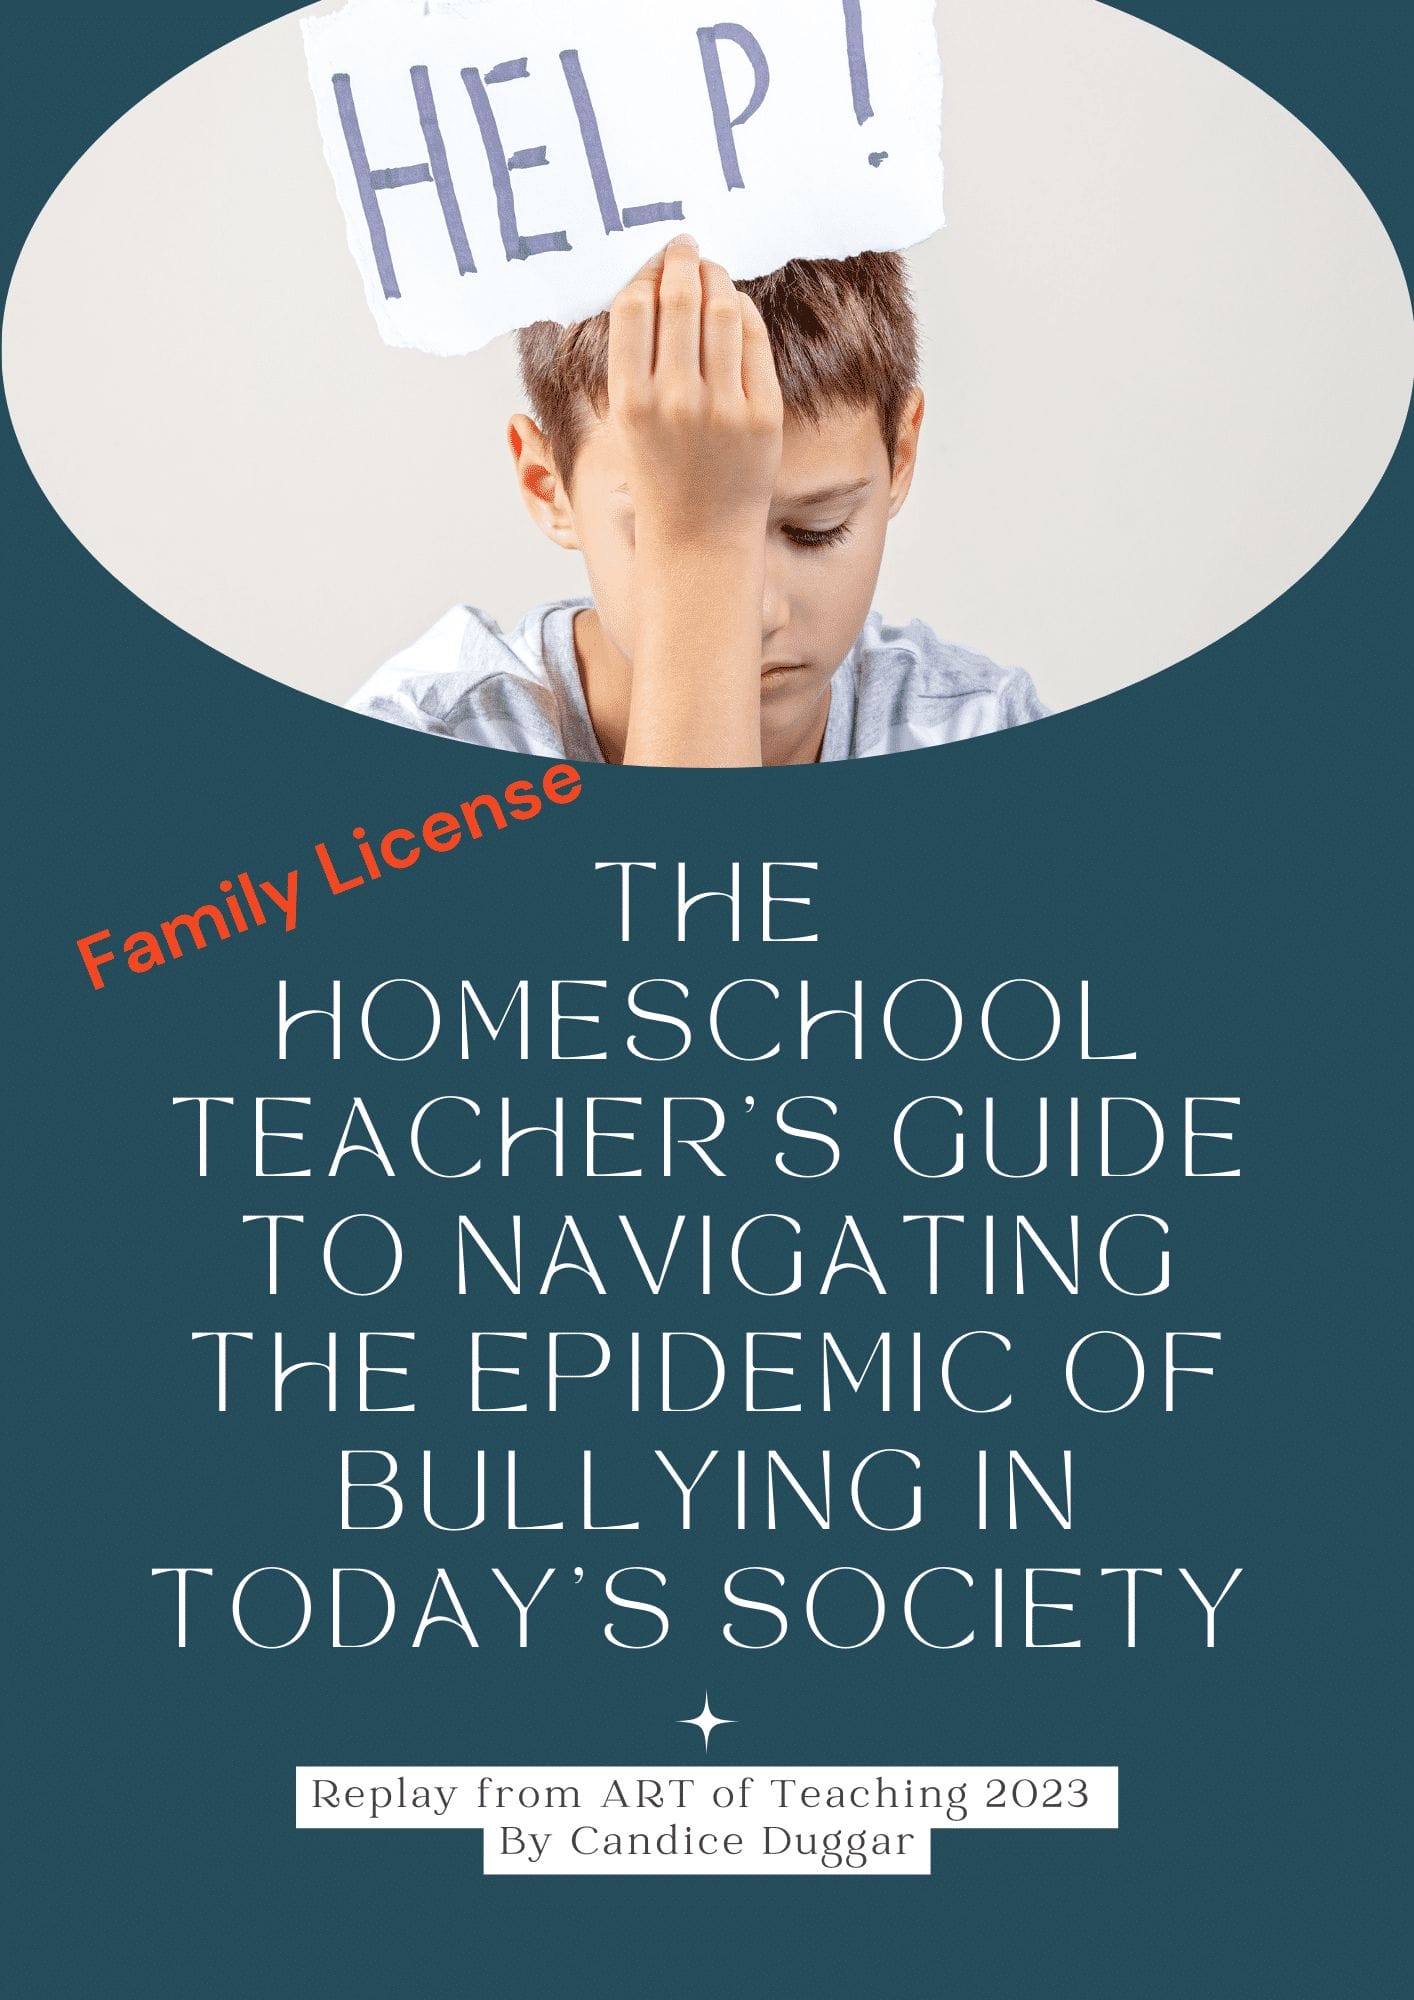 Homeschool Teacher’s Guide to Navigating the Epidemic of Bullying in Today’s Society